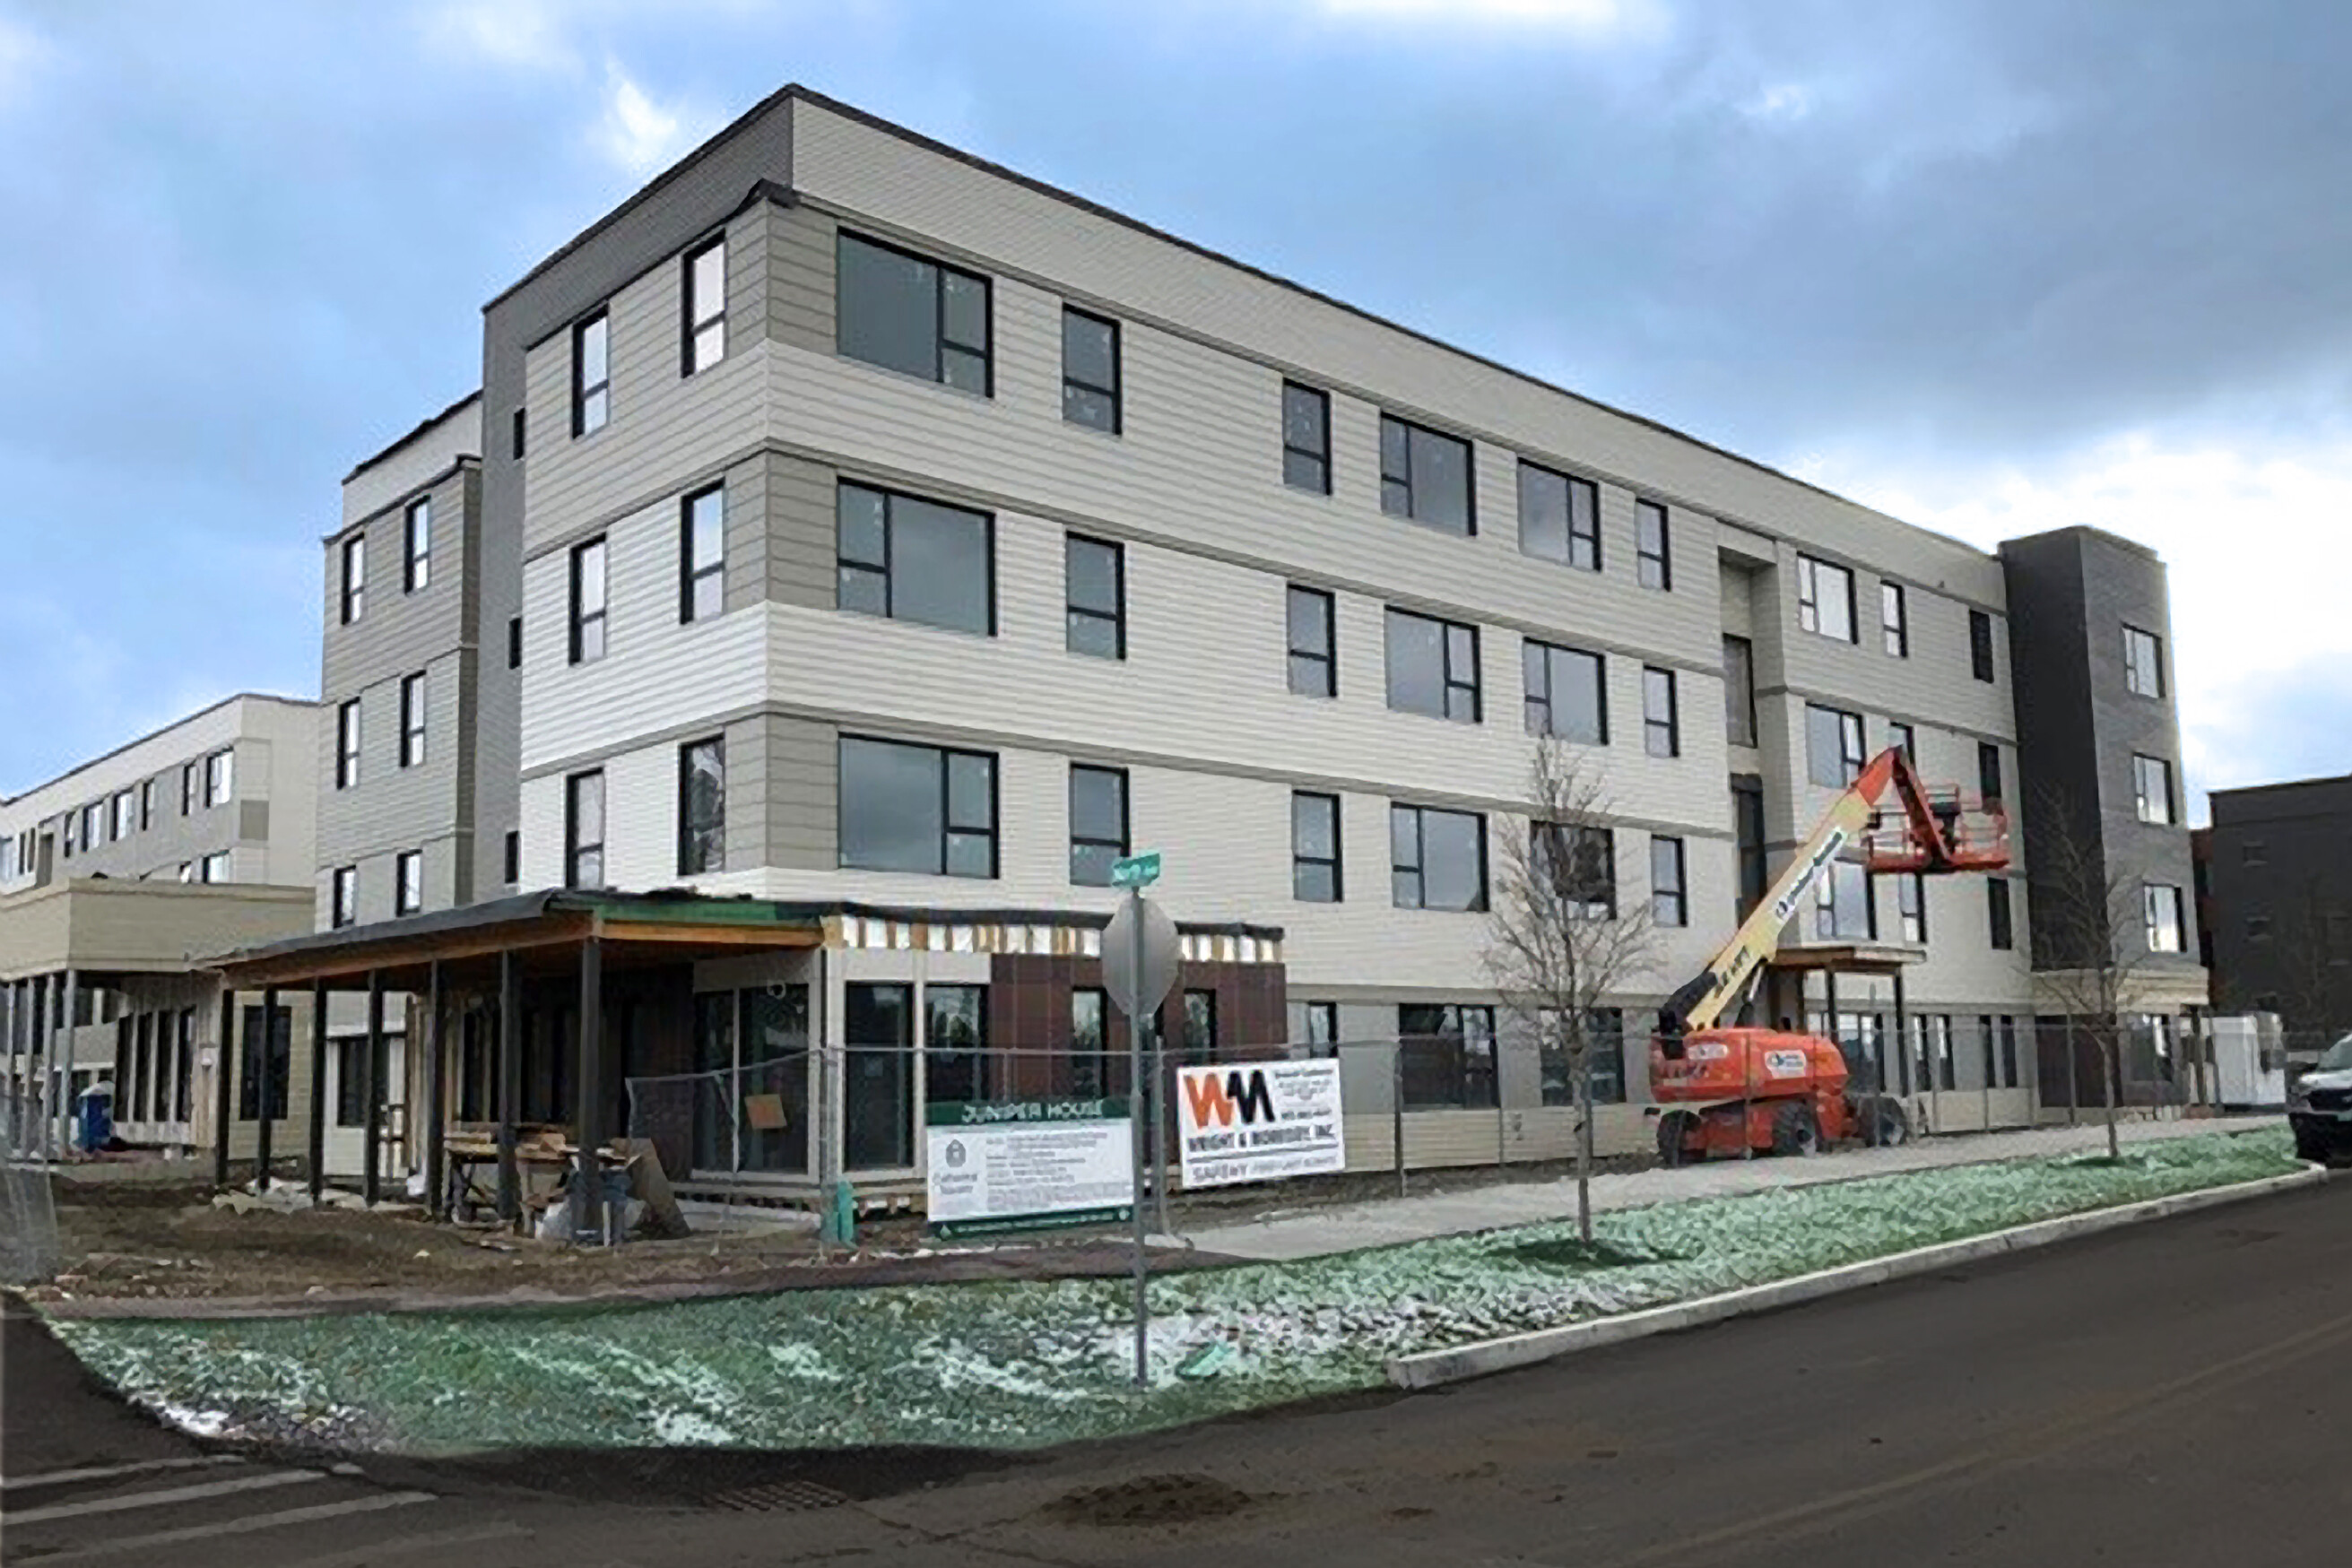 Photo of Juniper House as construction nears completion.